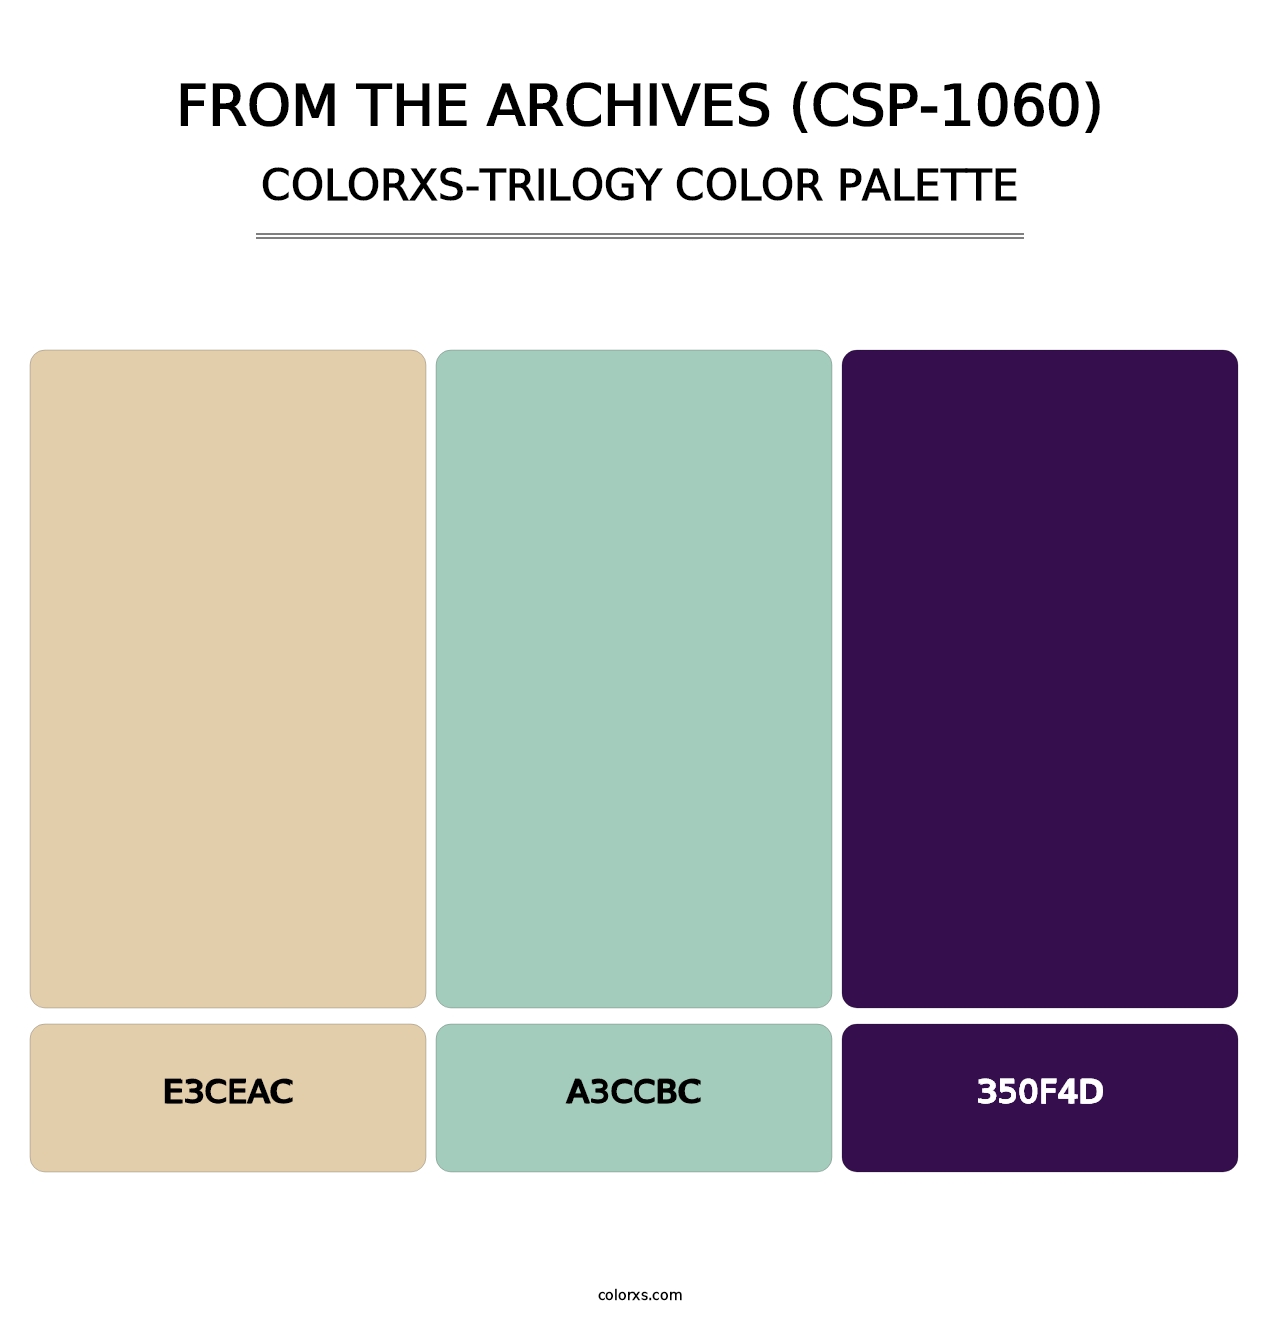 From the Archives (CSP-1060) - Colorxs Trilogy Palette